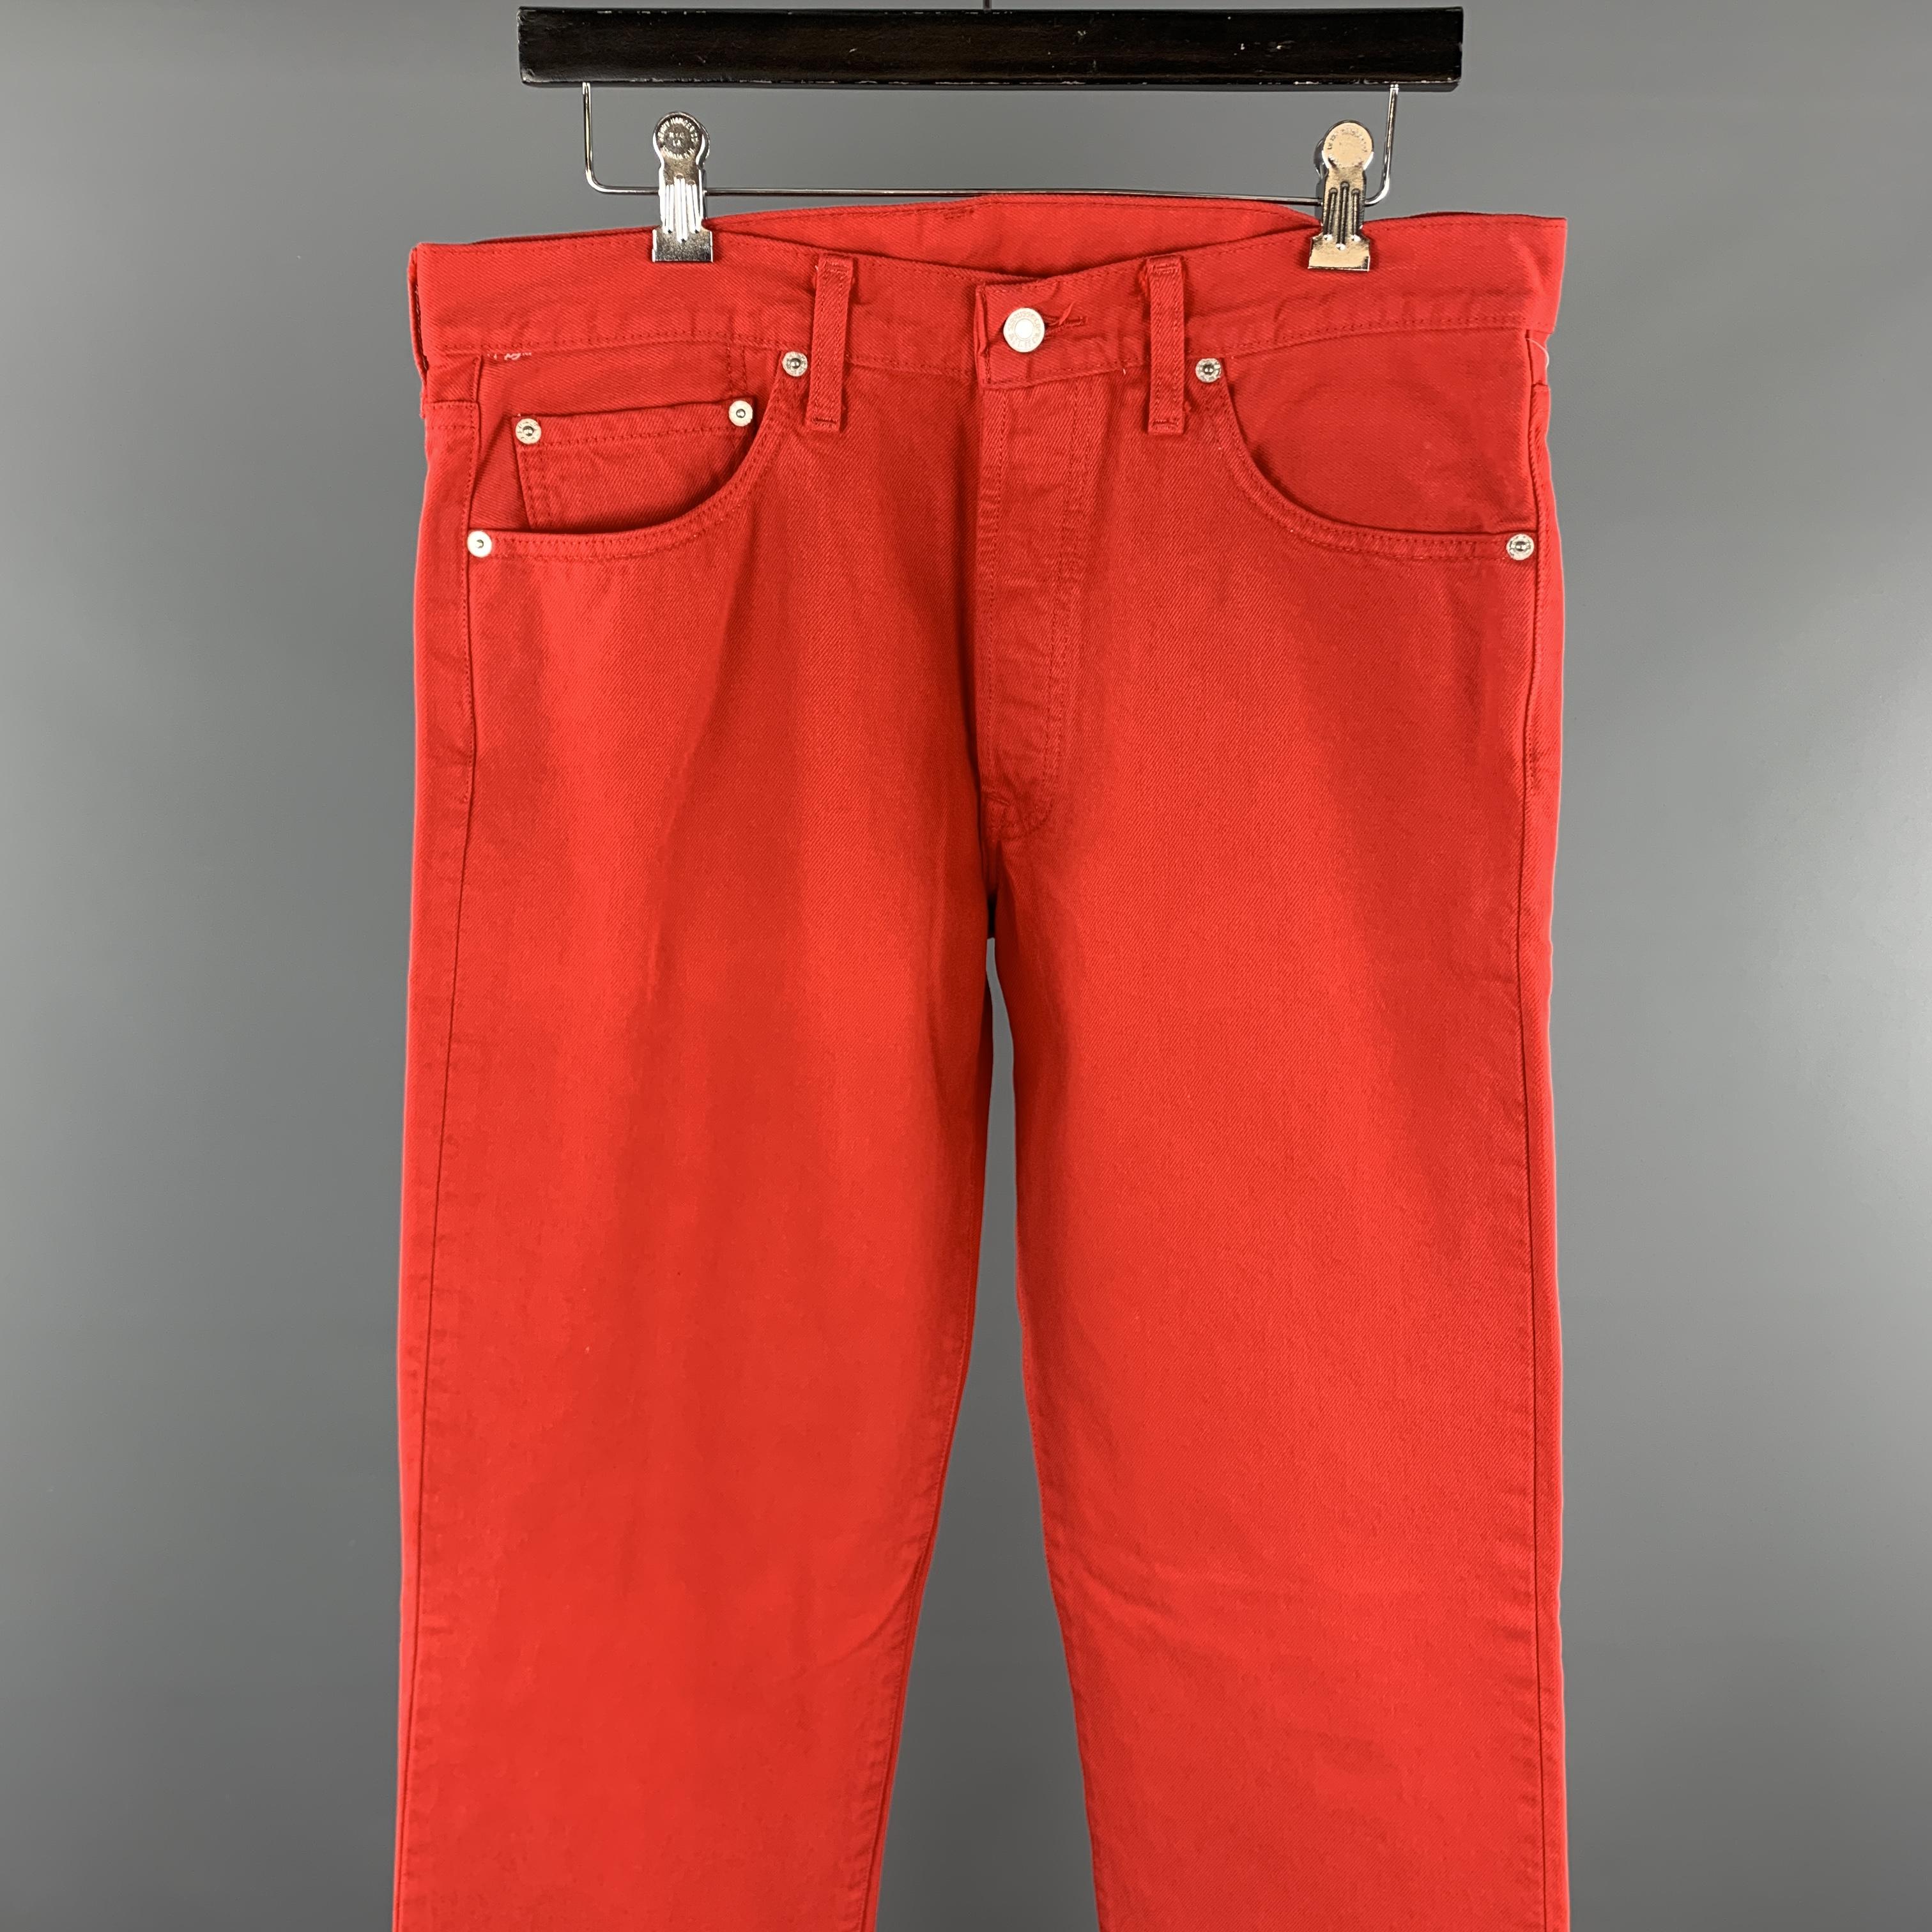 LEVI'S x 501 XX ALIFE casual pants comes in a red cotton featuring a jean cut style and a button fly closure. 


Very Good Pre-Owned Condition.
Marked: 34 x 32

Measurements:

Waist: 32 in. 
Rise: 9.5 in.
Inseam: 32 in.